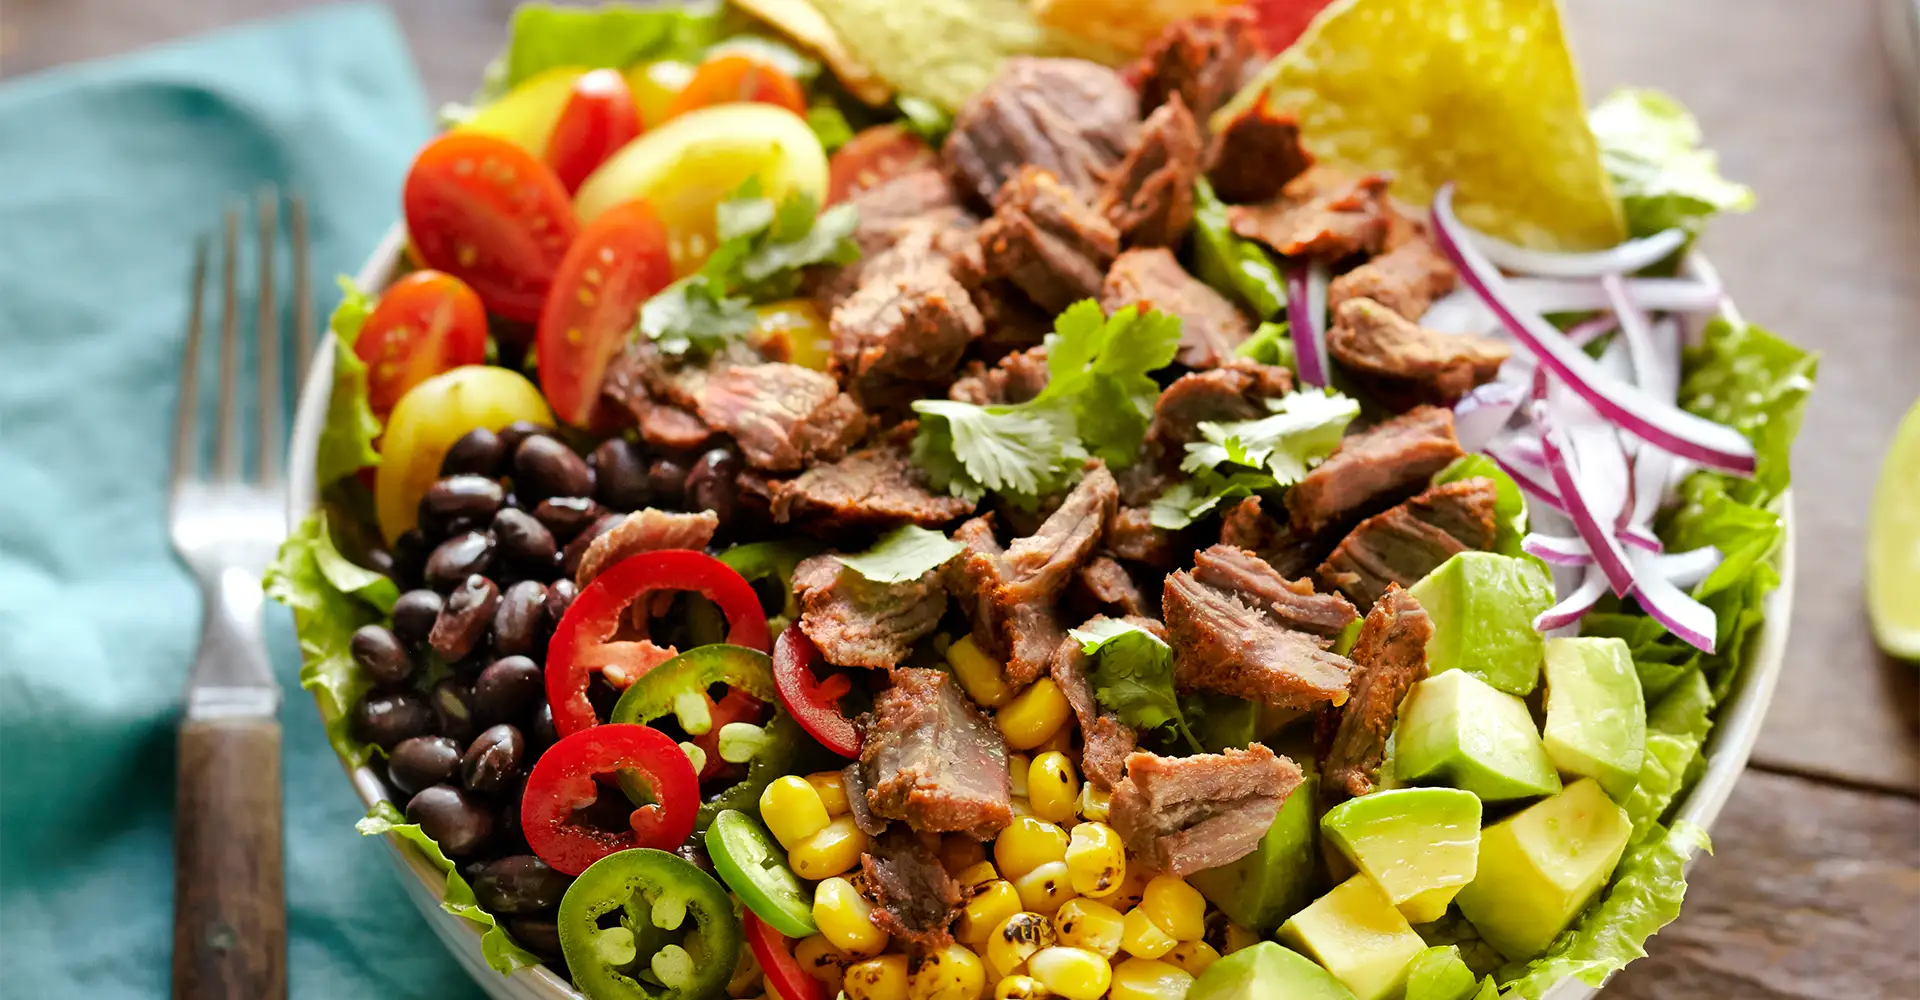 Beef taco bowl made with Truly Simple Fully Cooked Barbacoa Beef